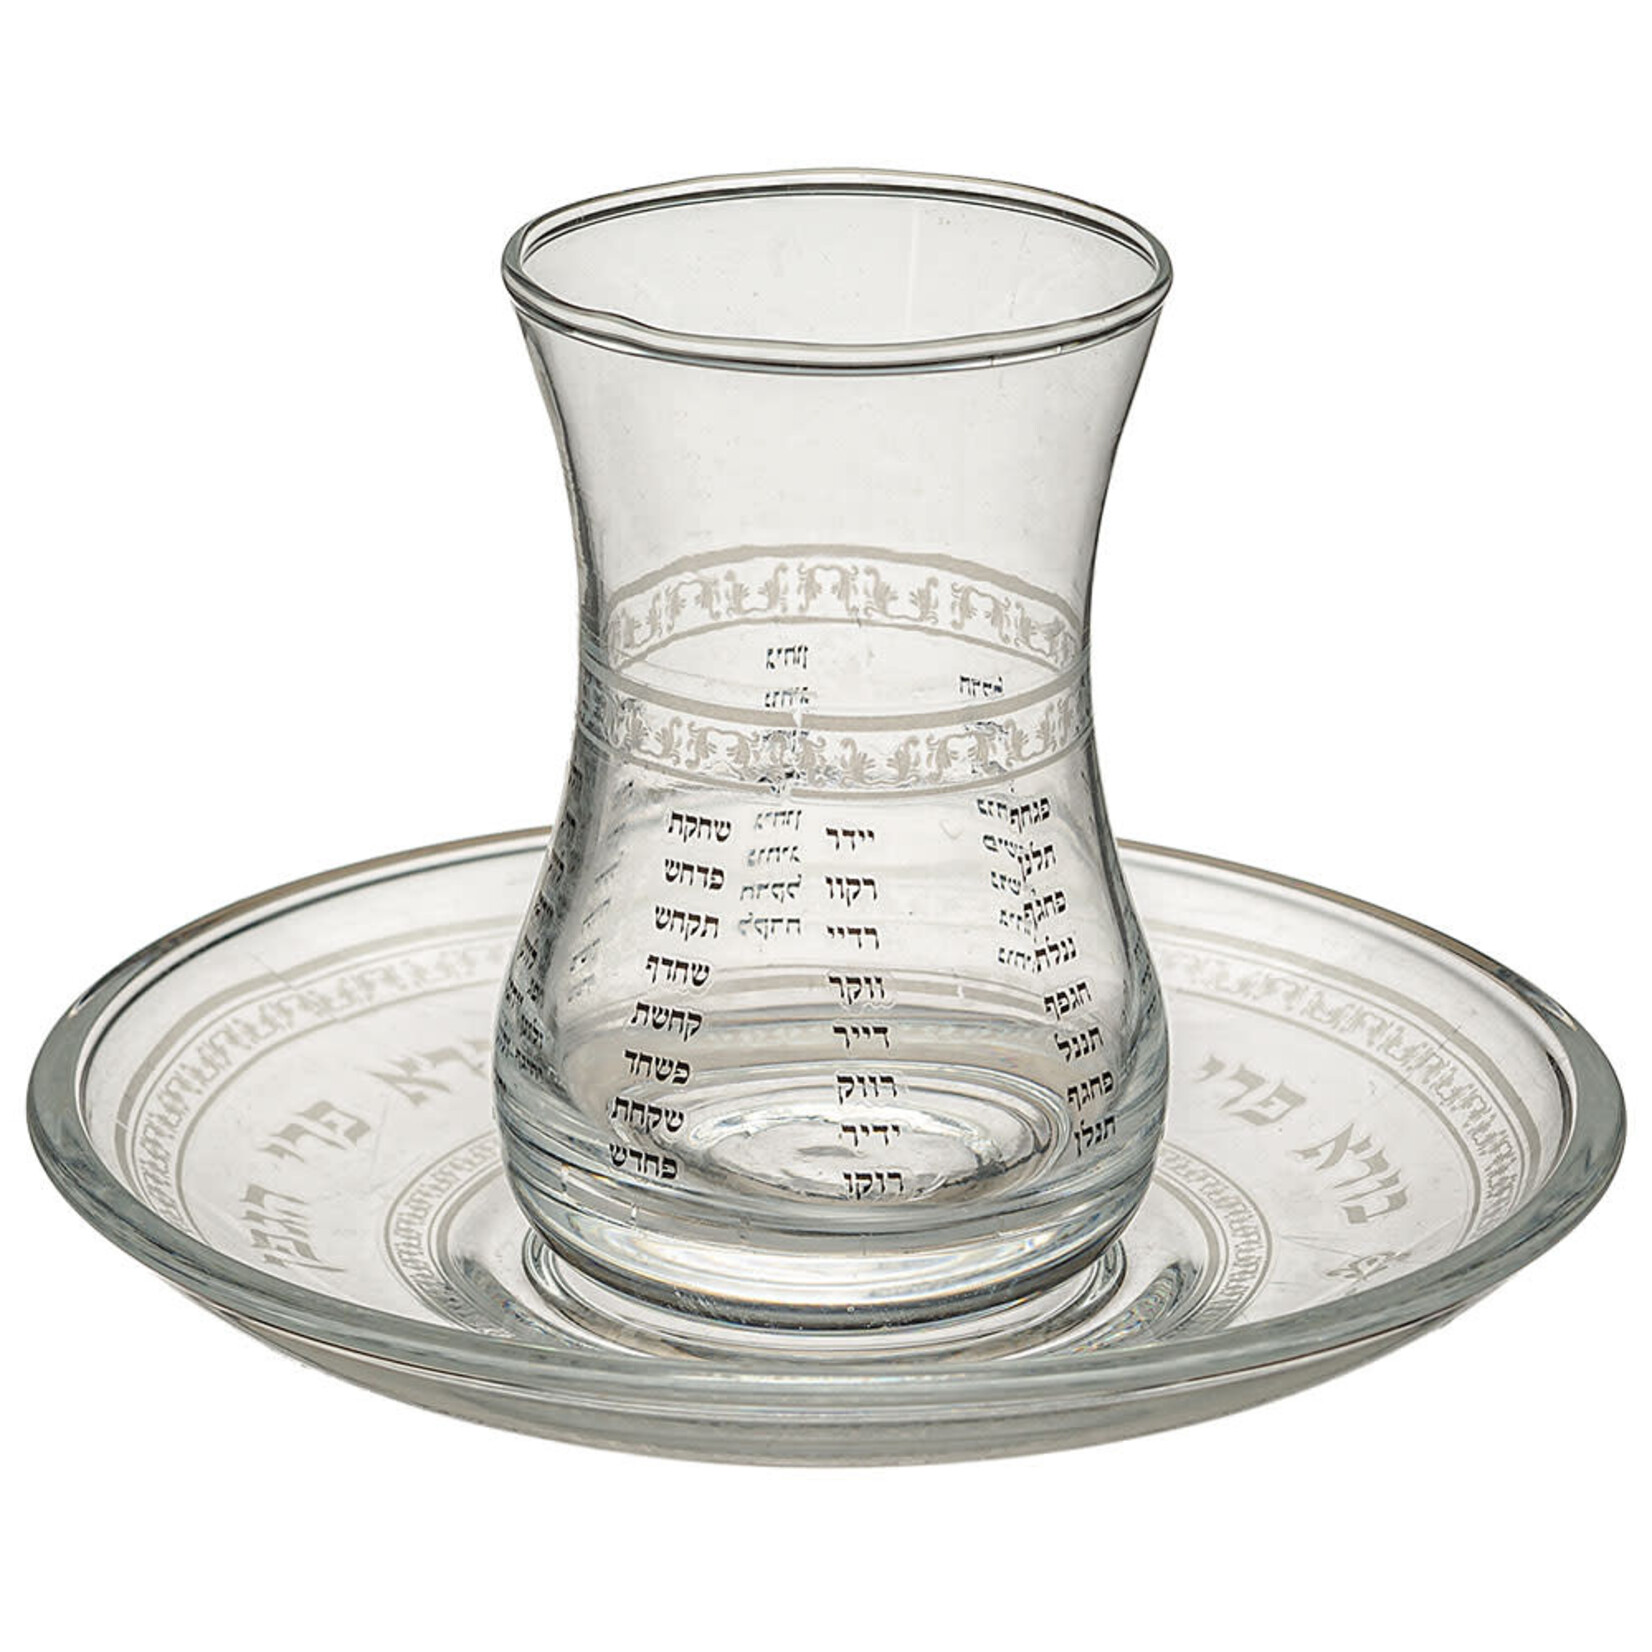 Kiddush Cup with Tray, Glass